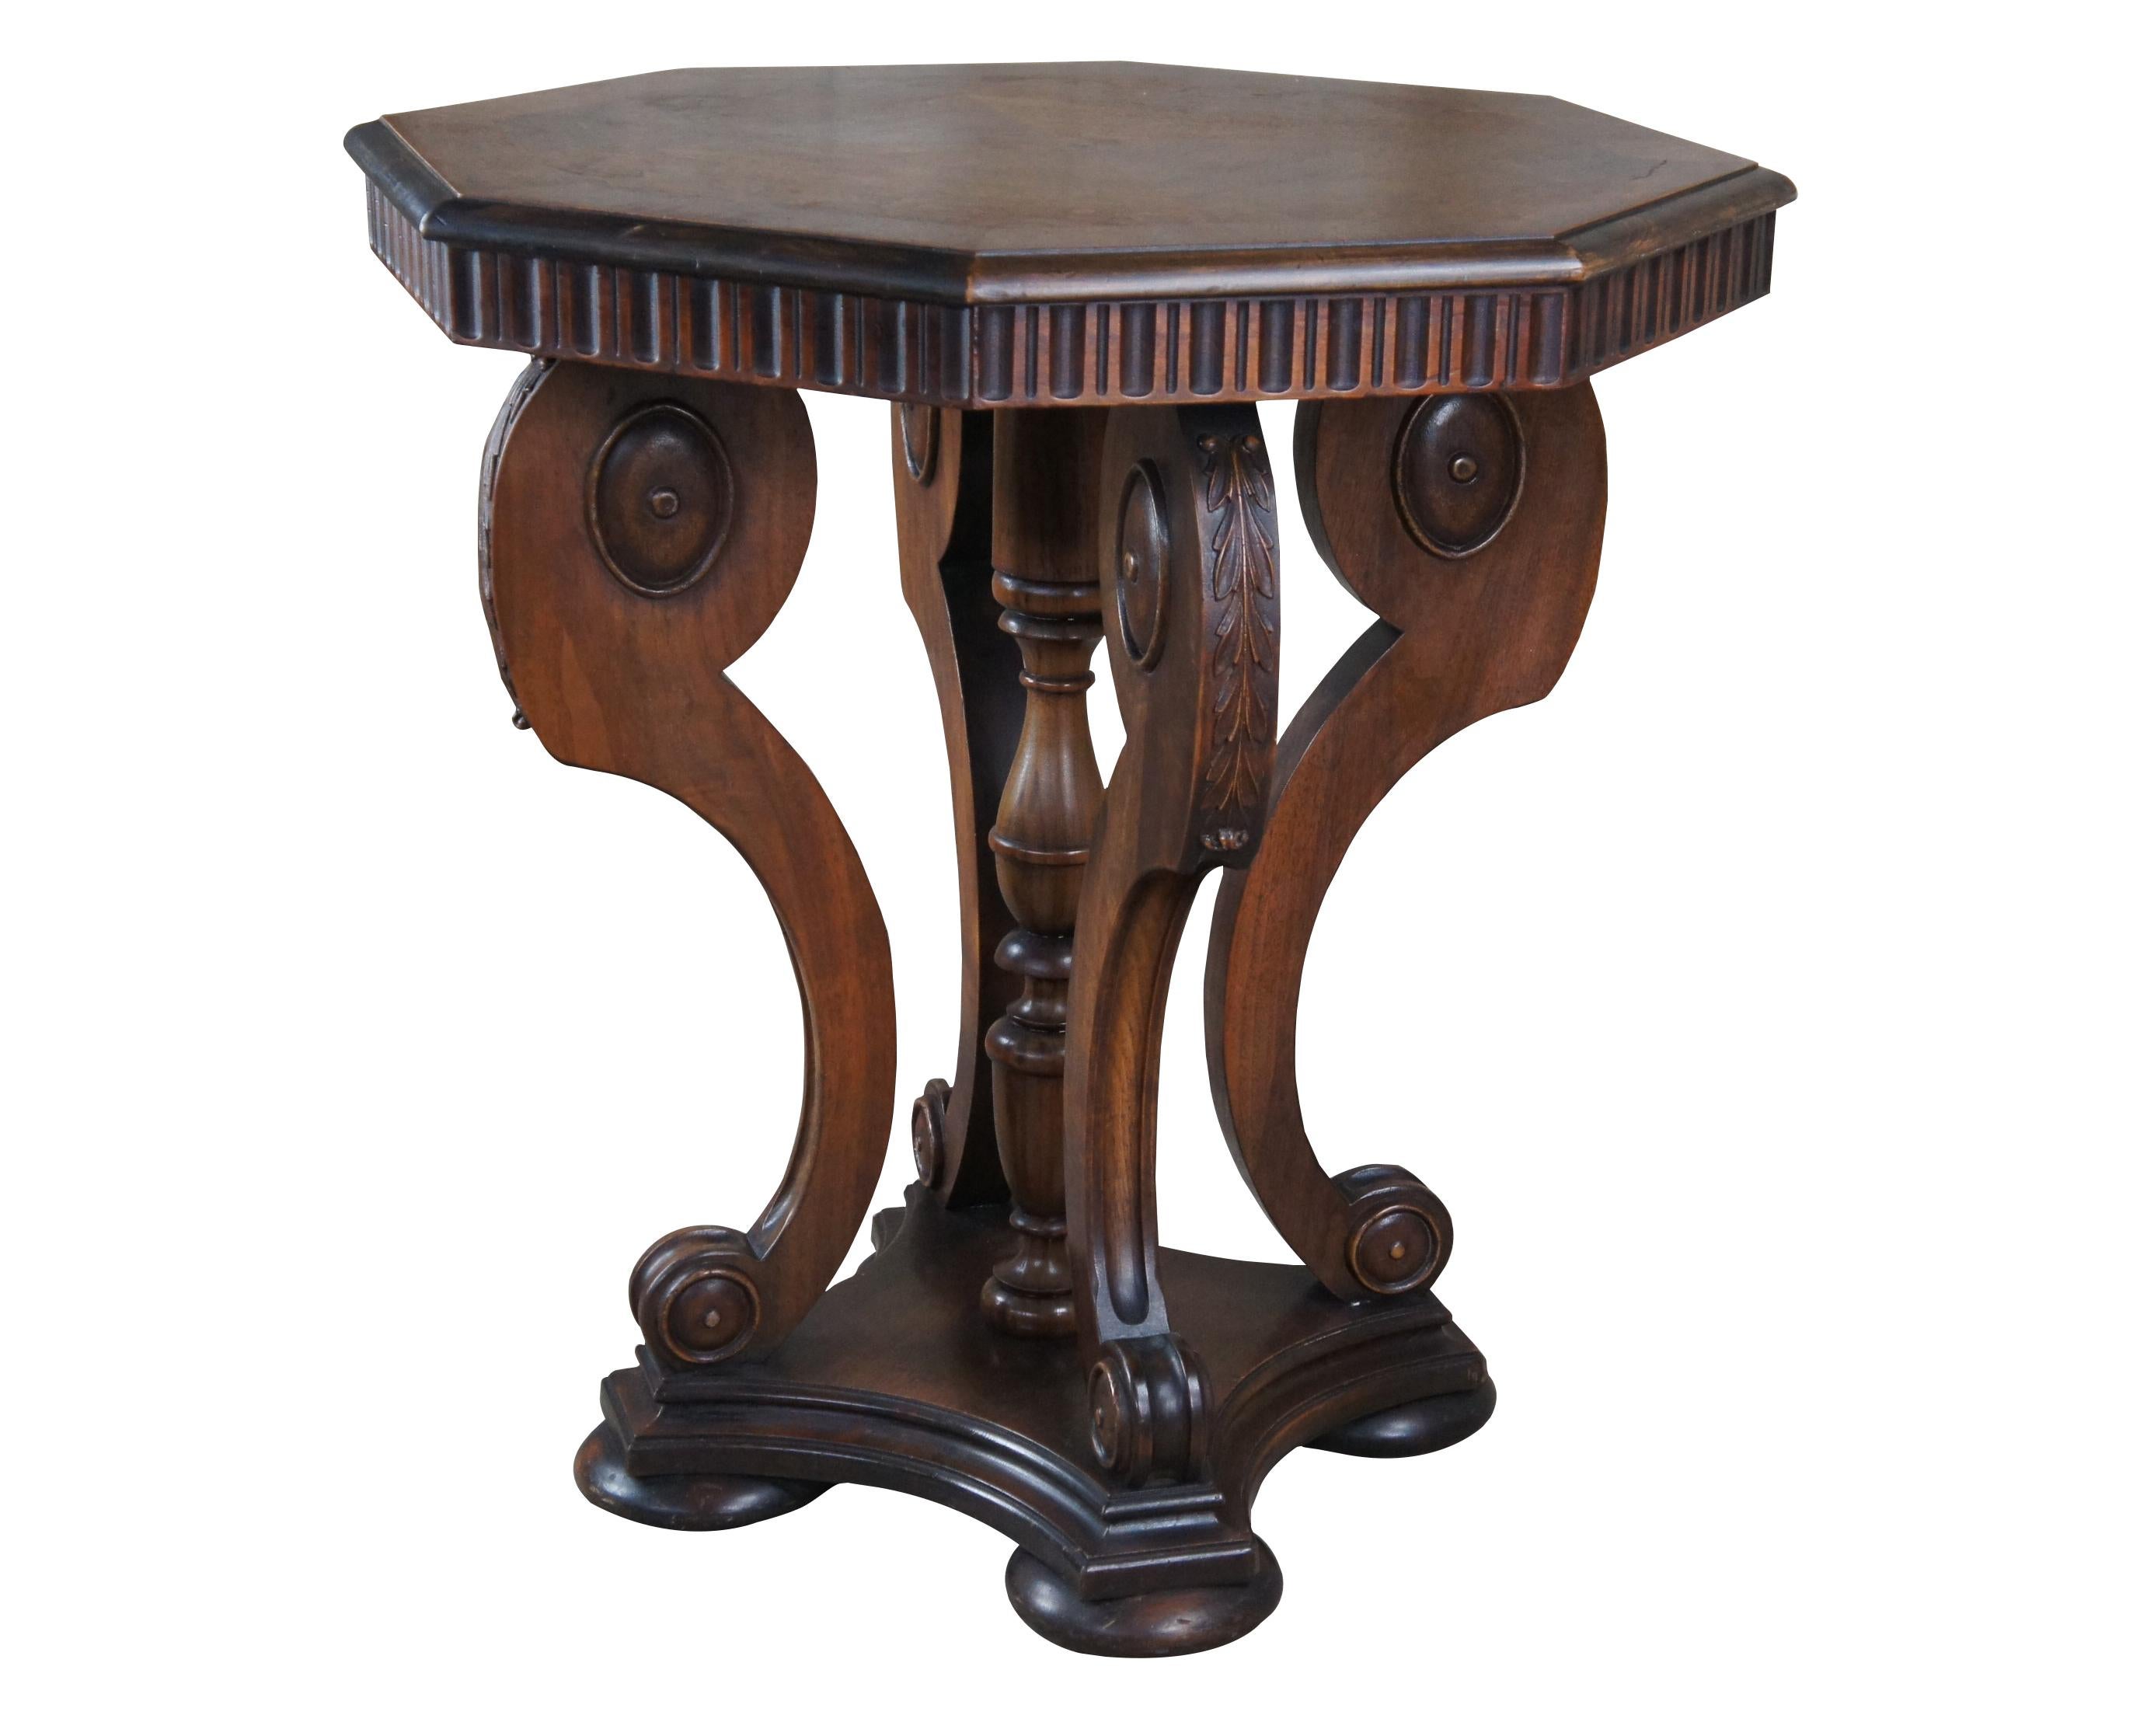 Antique Victorian parlor center table or stand.  Made of walnut featuring octagonal form with fluted accents, serpentine supports with carved acanthus leaves, turned trophy urn accent and bun feet.

Dimensions:
28.5